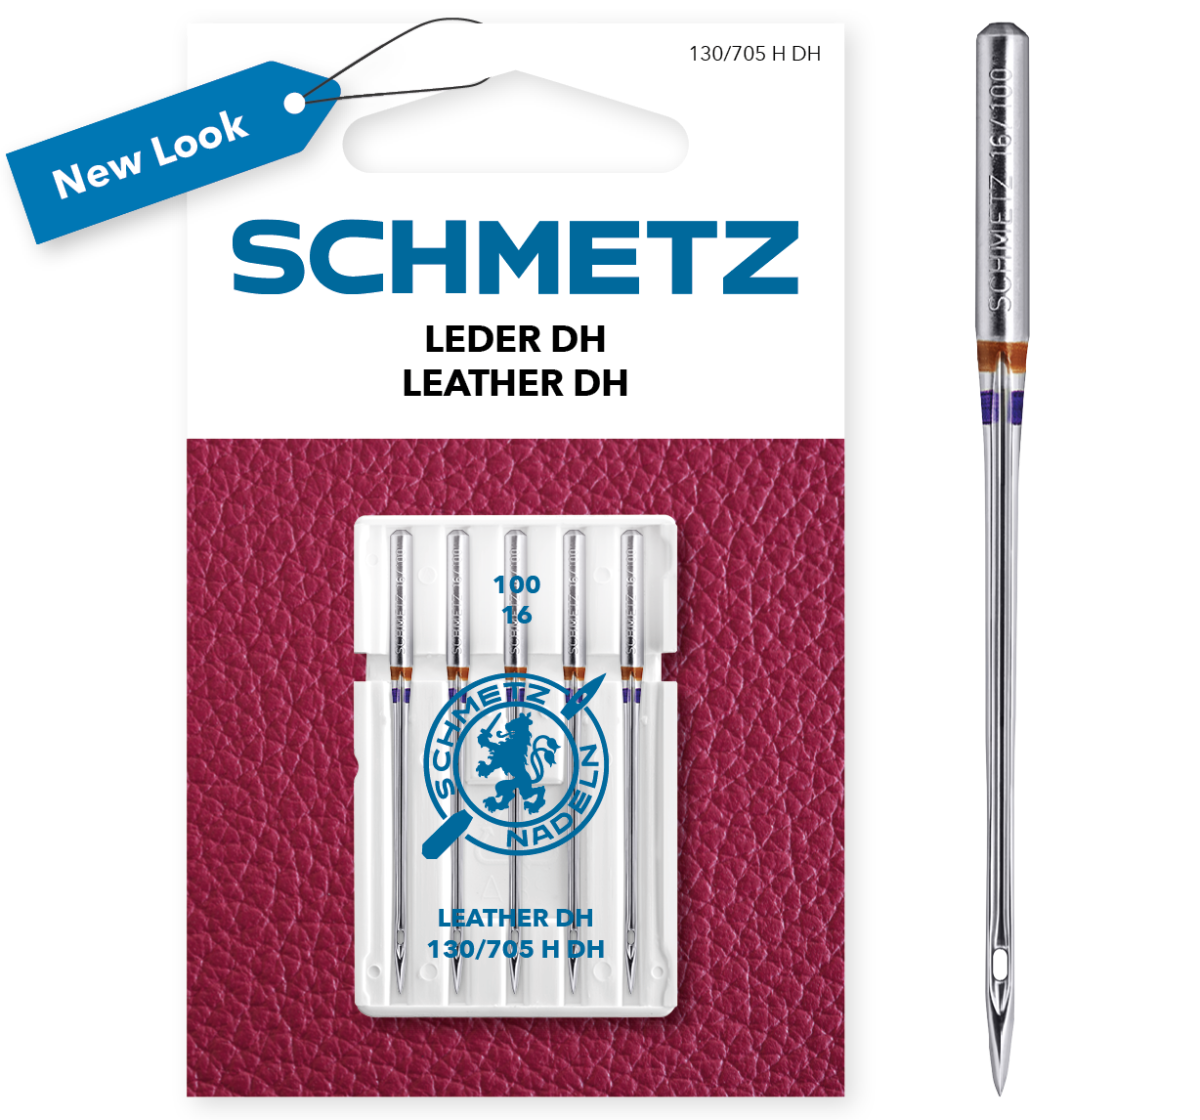 Schmetz Needle Leather Size 100/16 (Pack Of 5) 